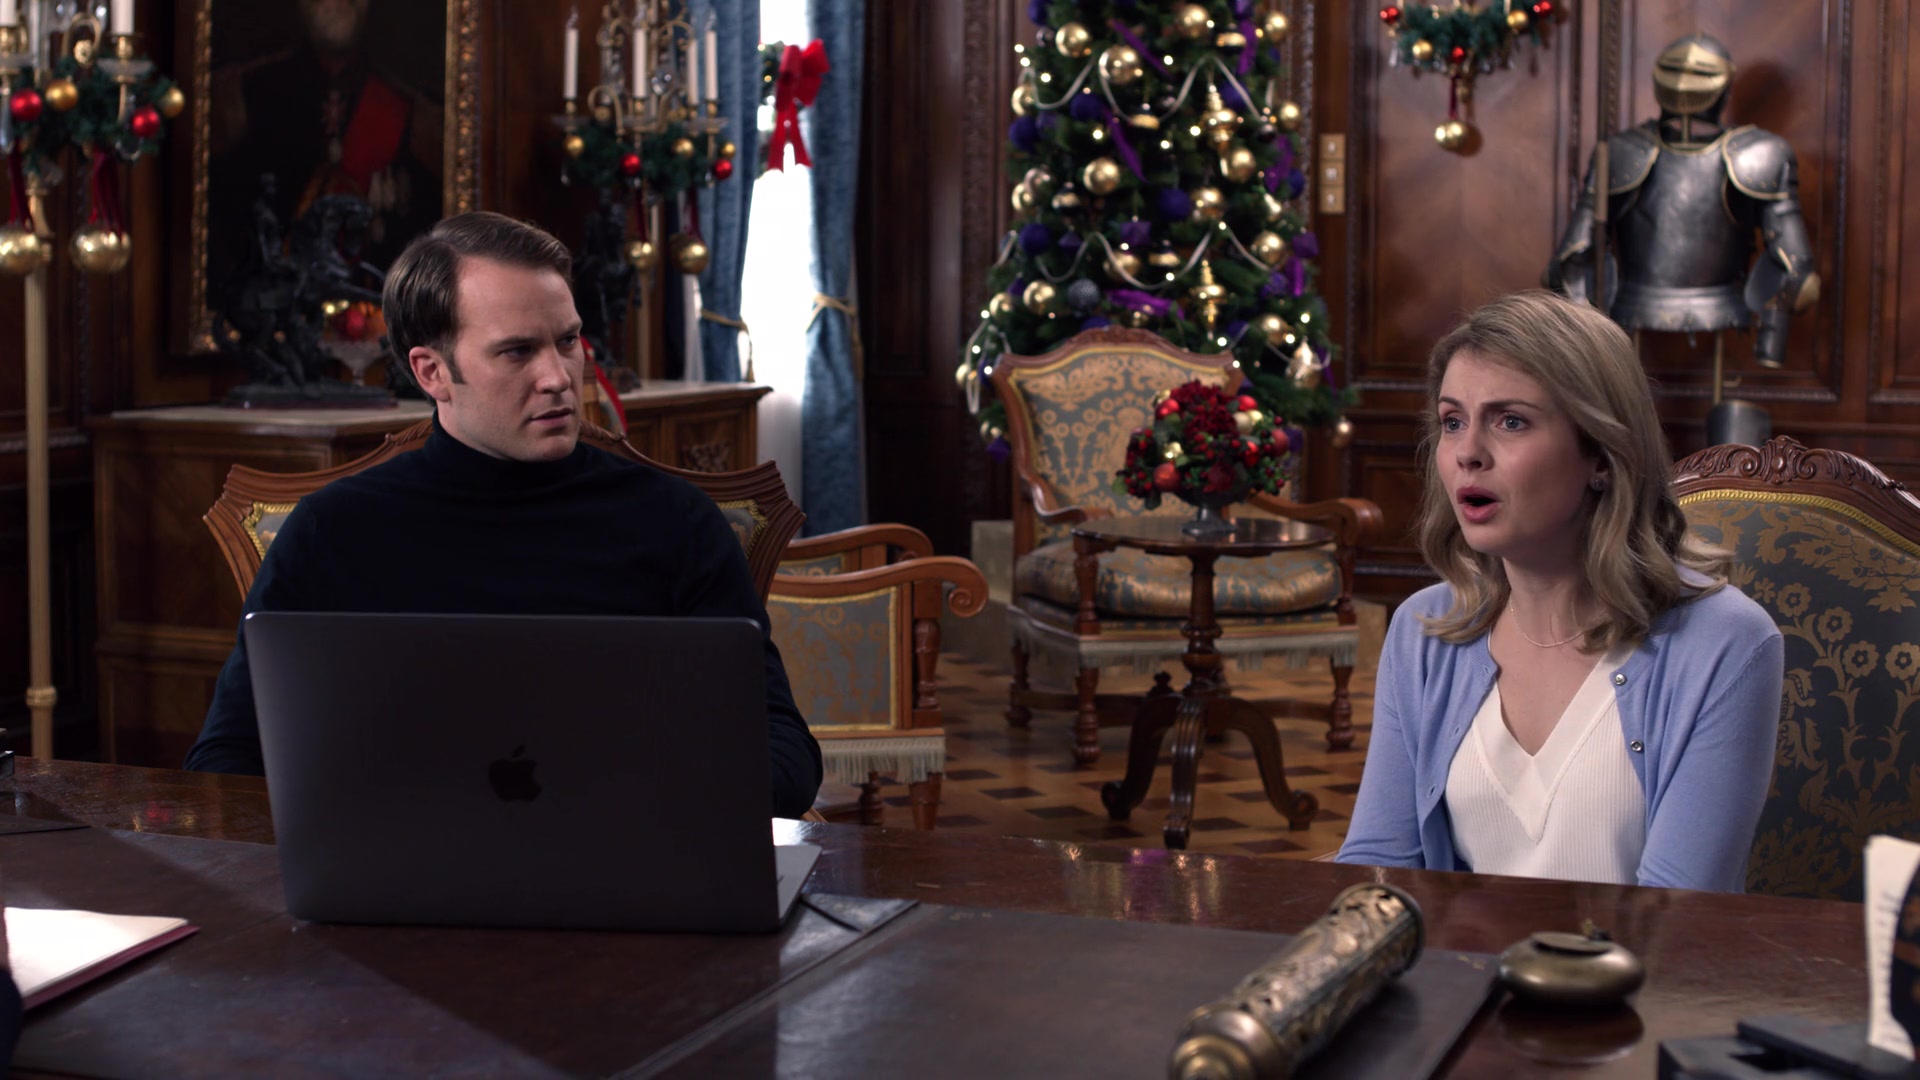 Apple MacBook Pro Used by Ben Lamb and Rose McIver in A Christmas Prince: The Royal Wedding (2018)